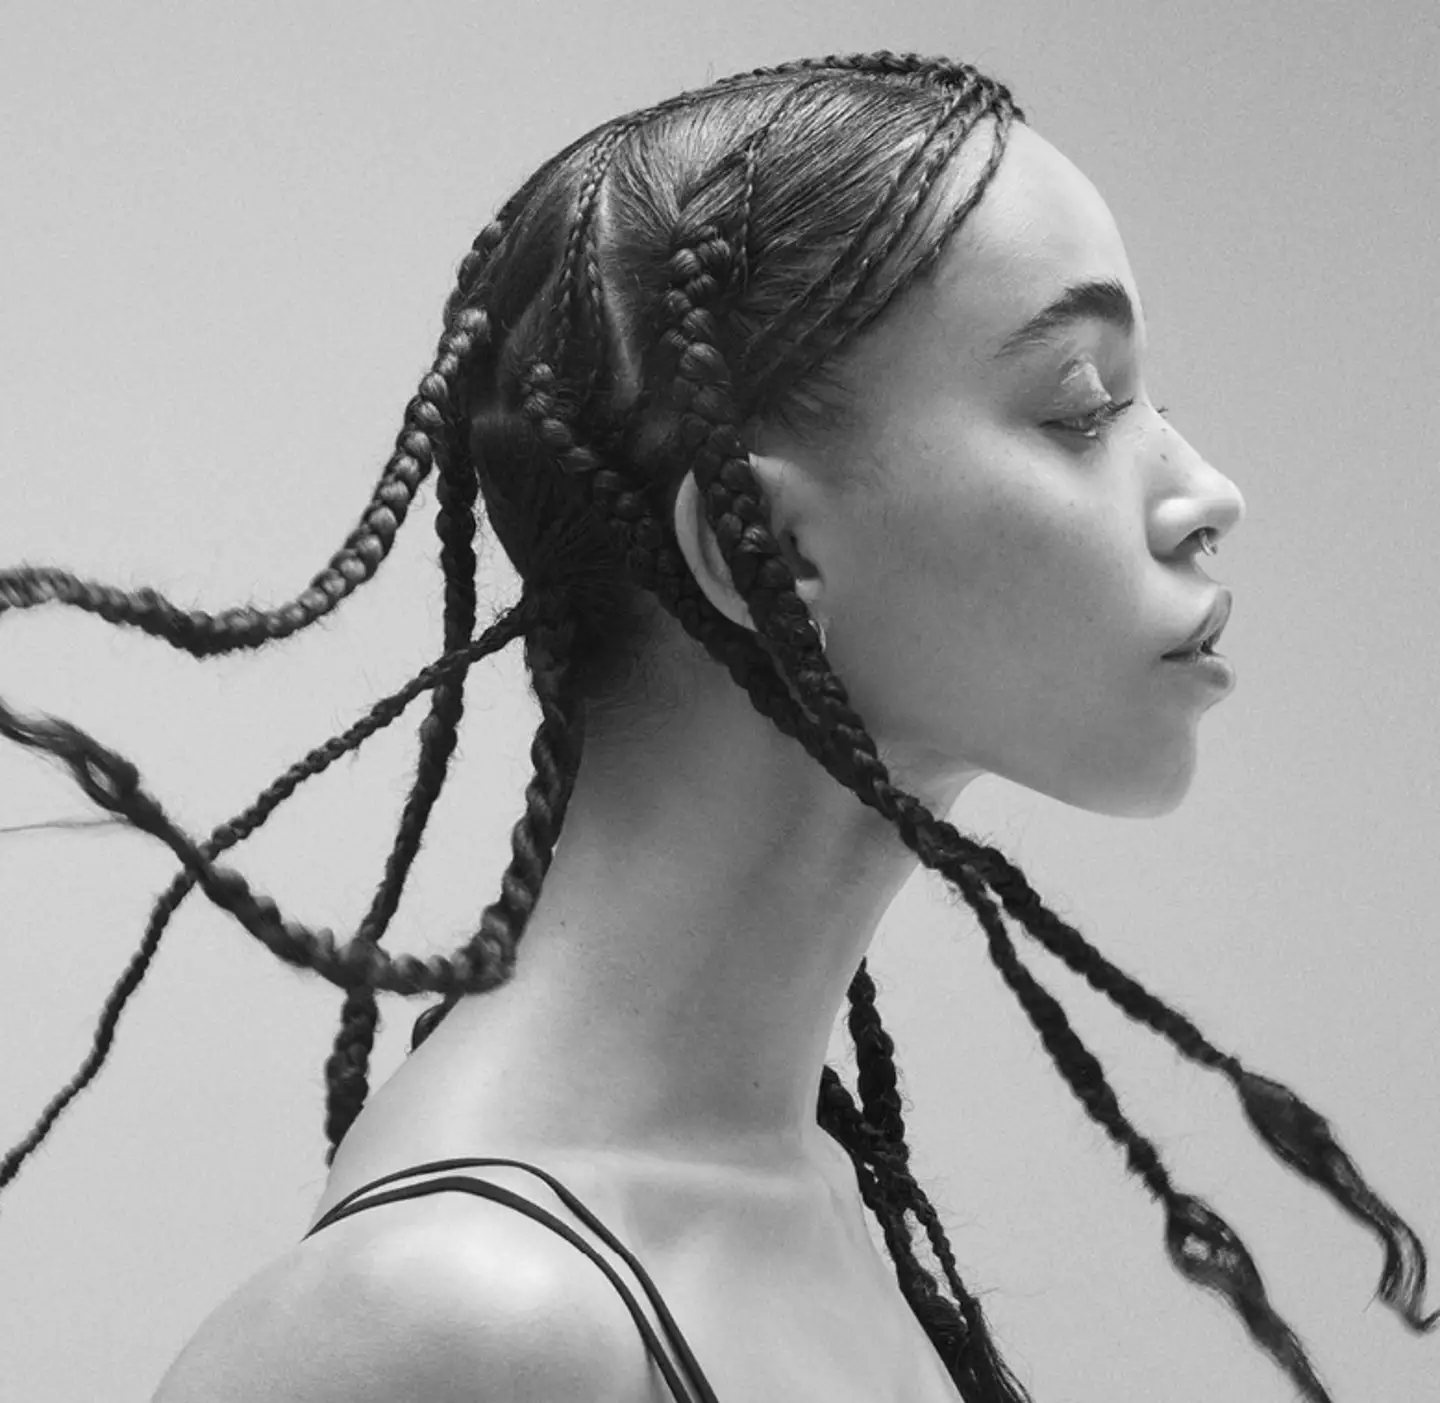 Calvin Klein argued FKA Twigs had chosen to align with the brand.